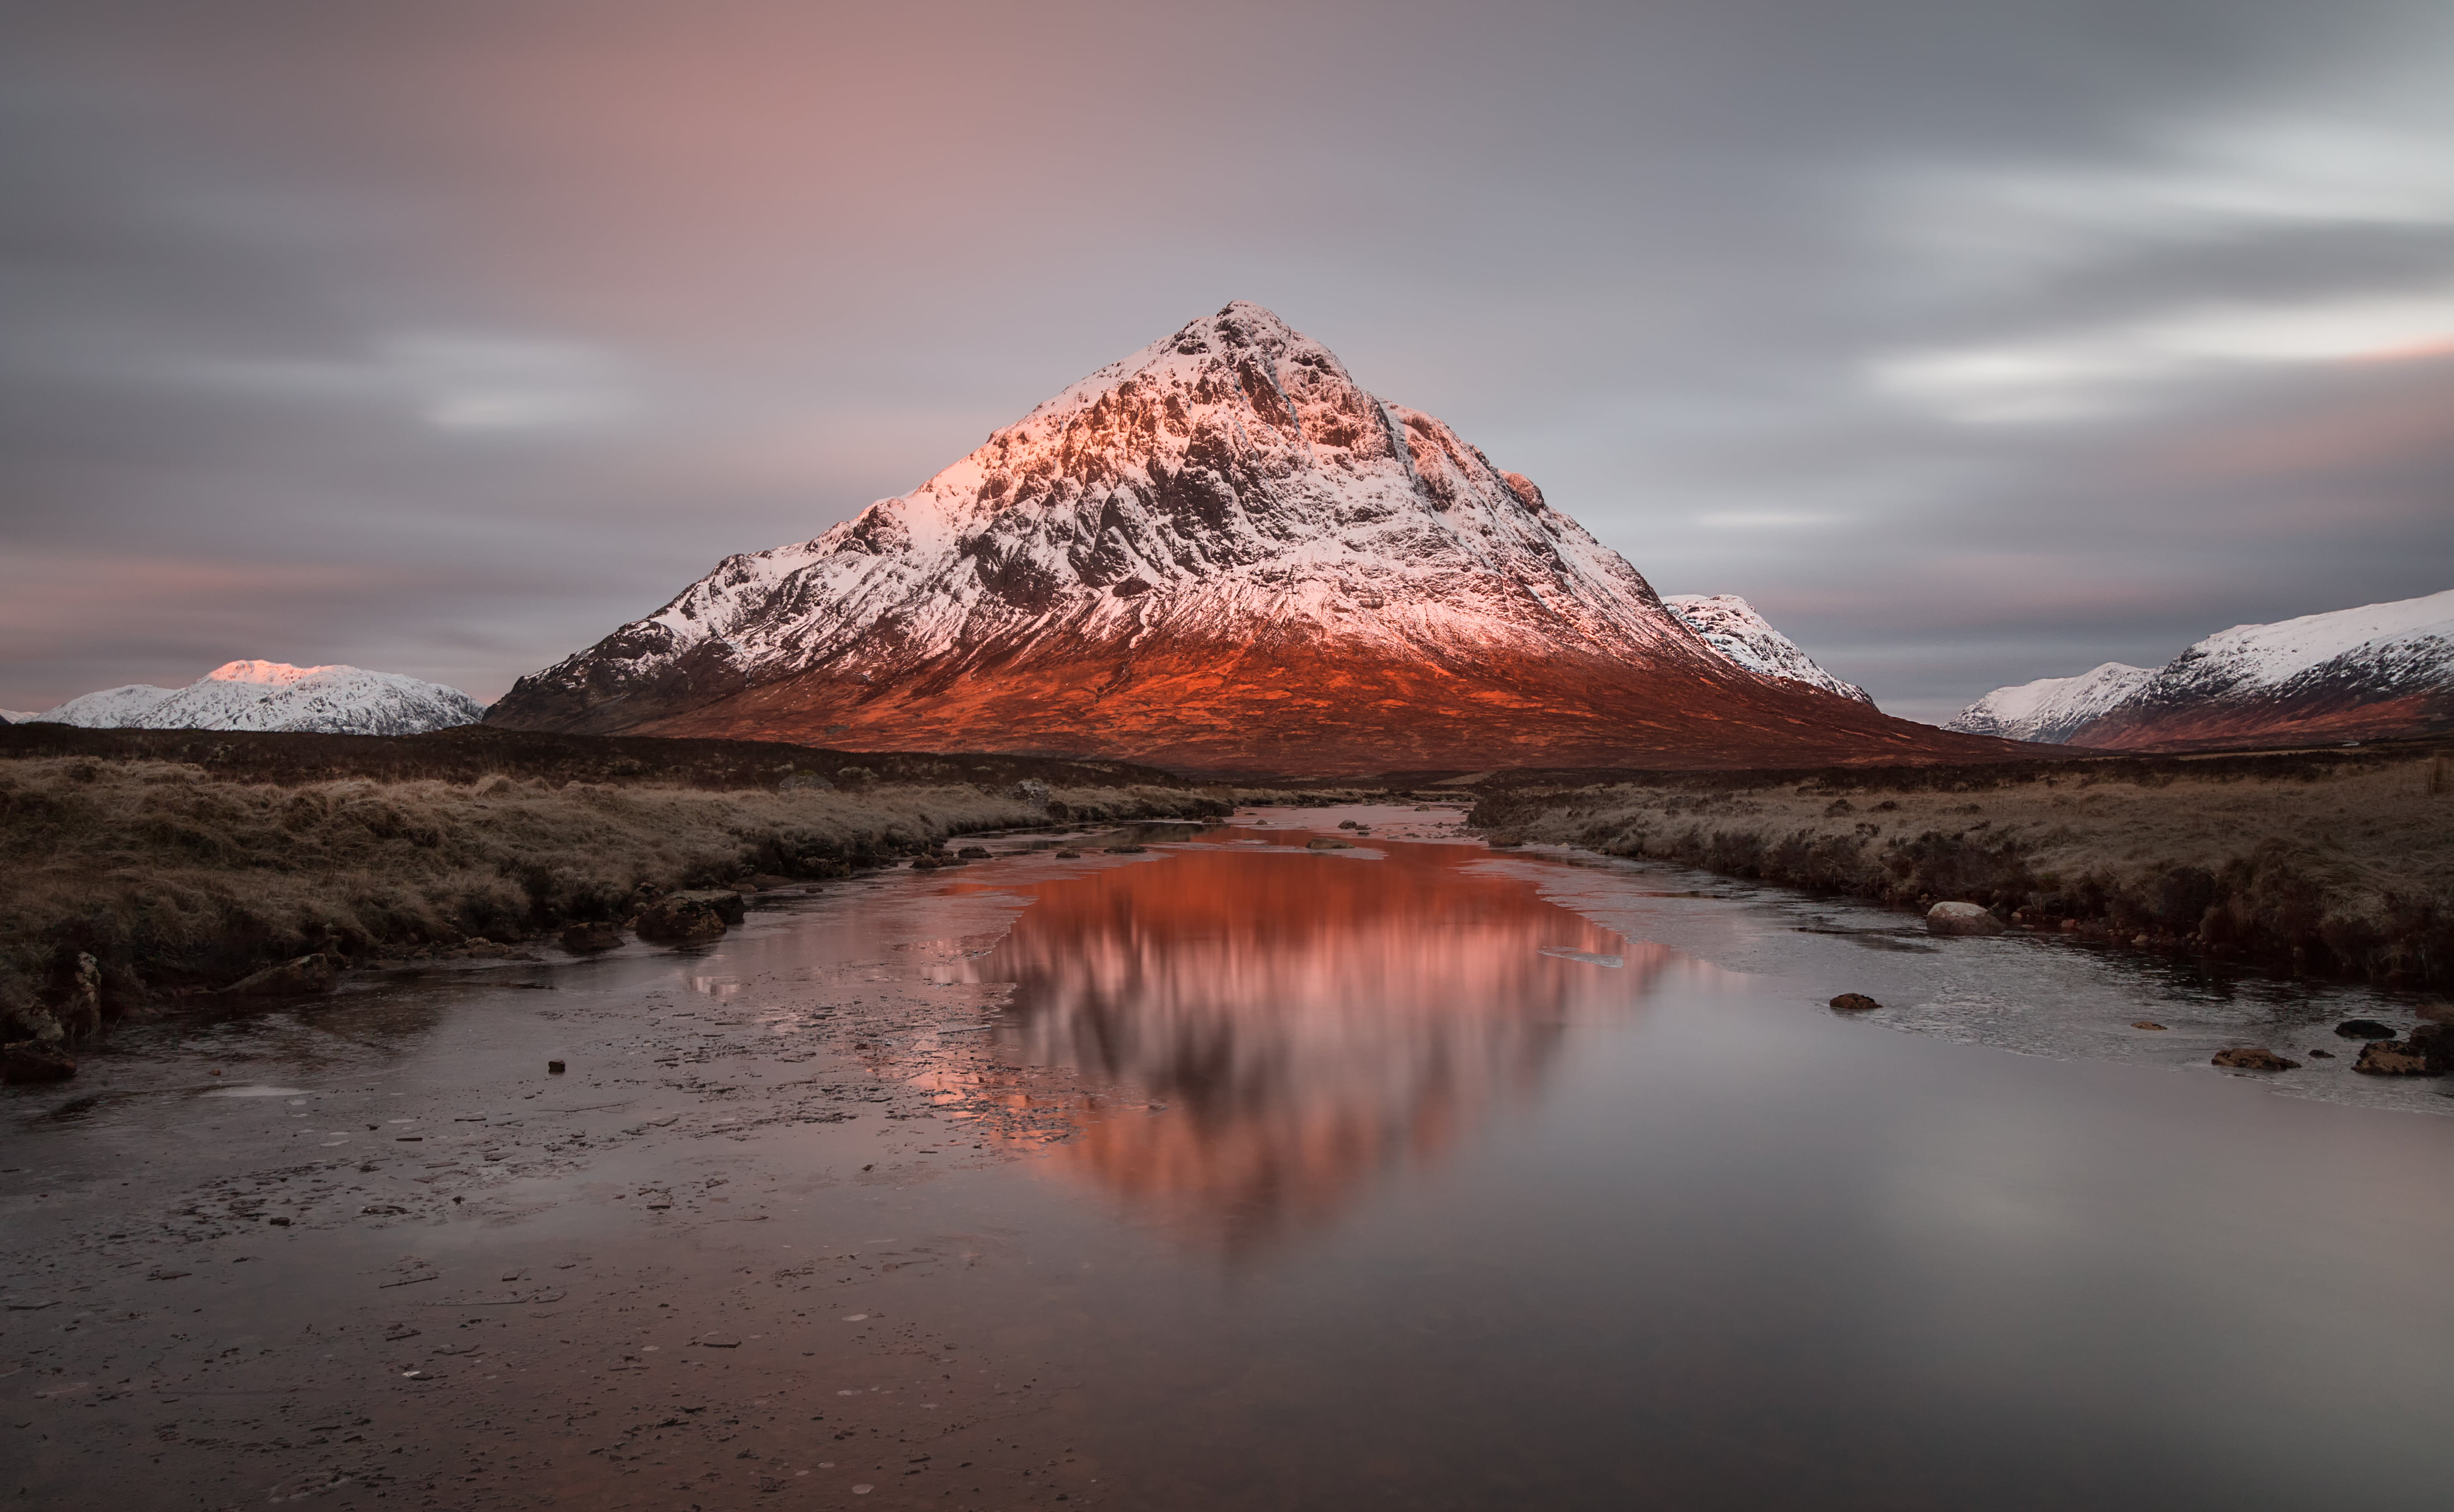 rocky mountain covered by snow photography, Buachaille Etive Mor